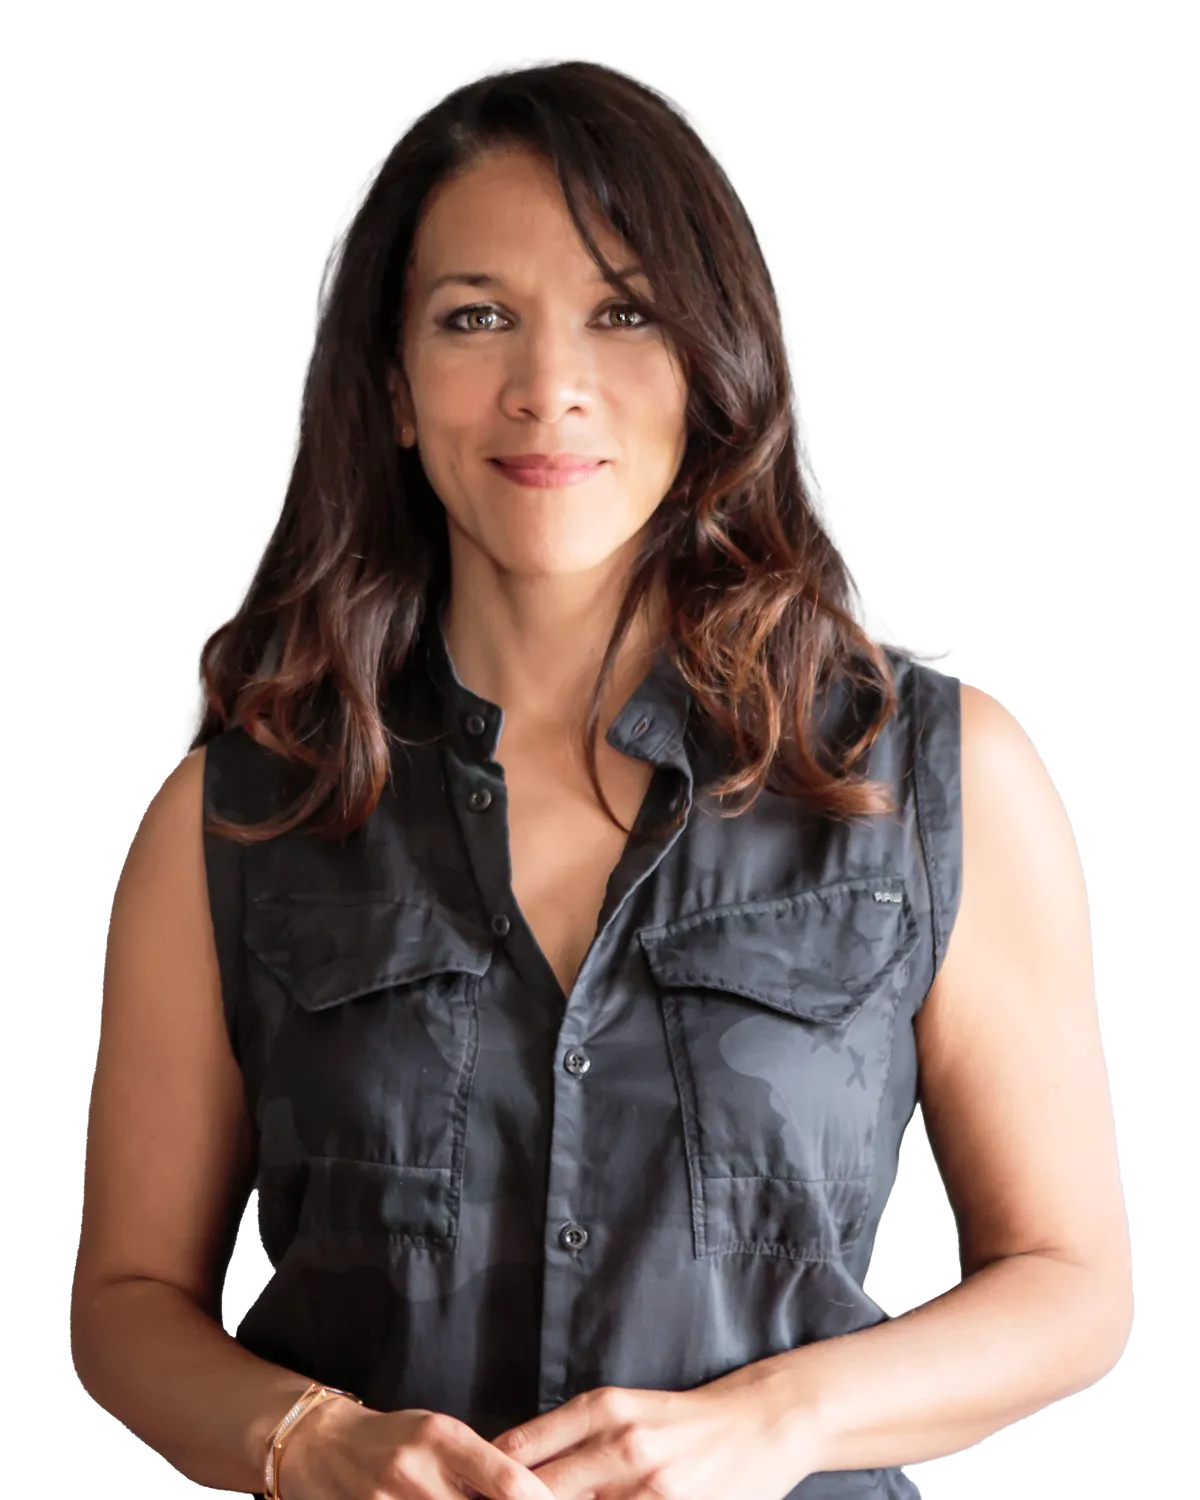 A woman with shoulder-length dark hair, wearing a sleeveless black shirt with buttoned pockets, standing in front of a plain gray background. She is smiling gently and has her hands clasped in front of her.